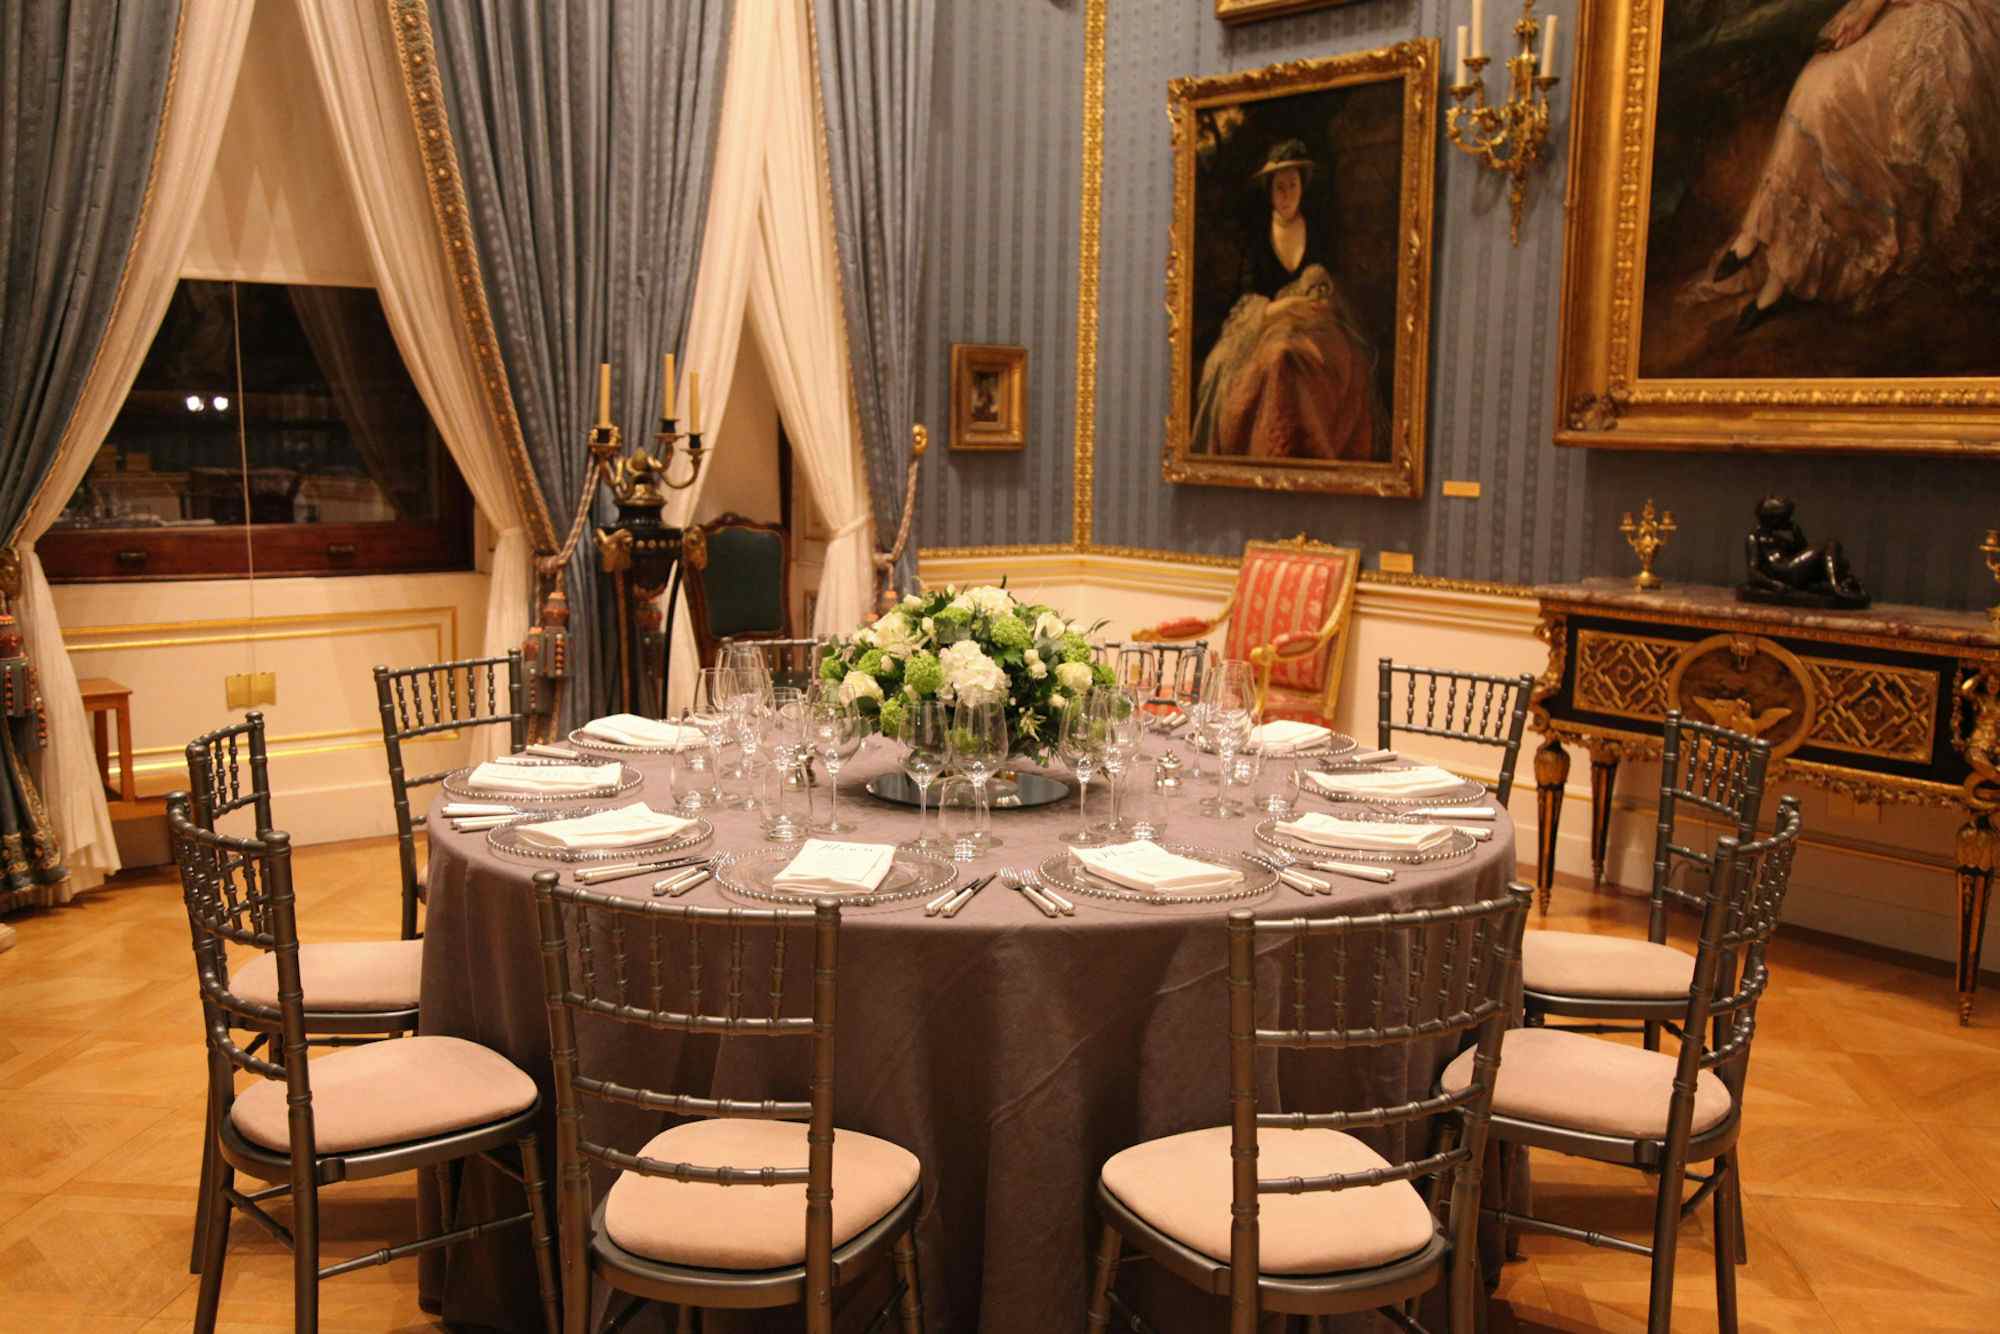 The West Room, The Wallace Collection